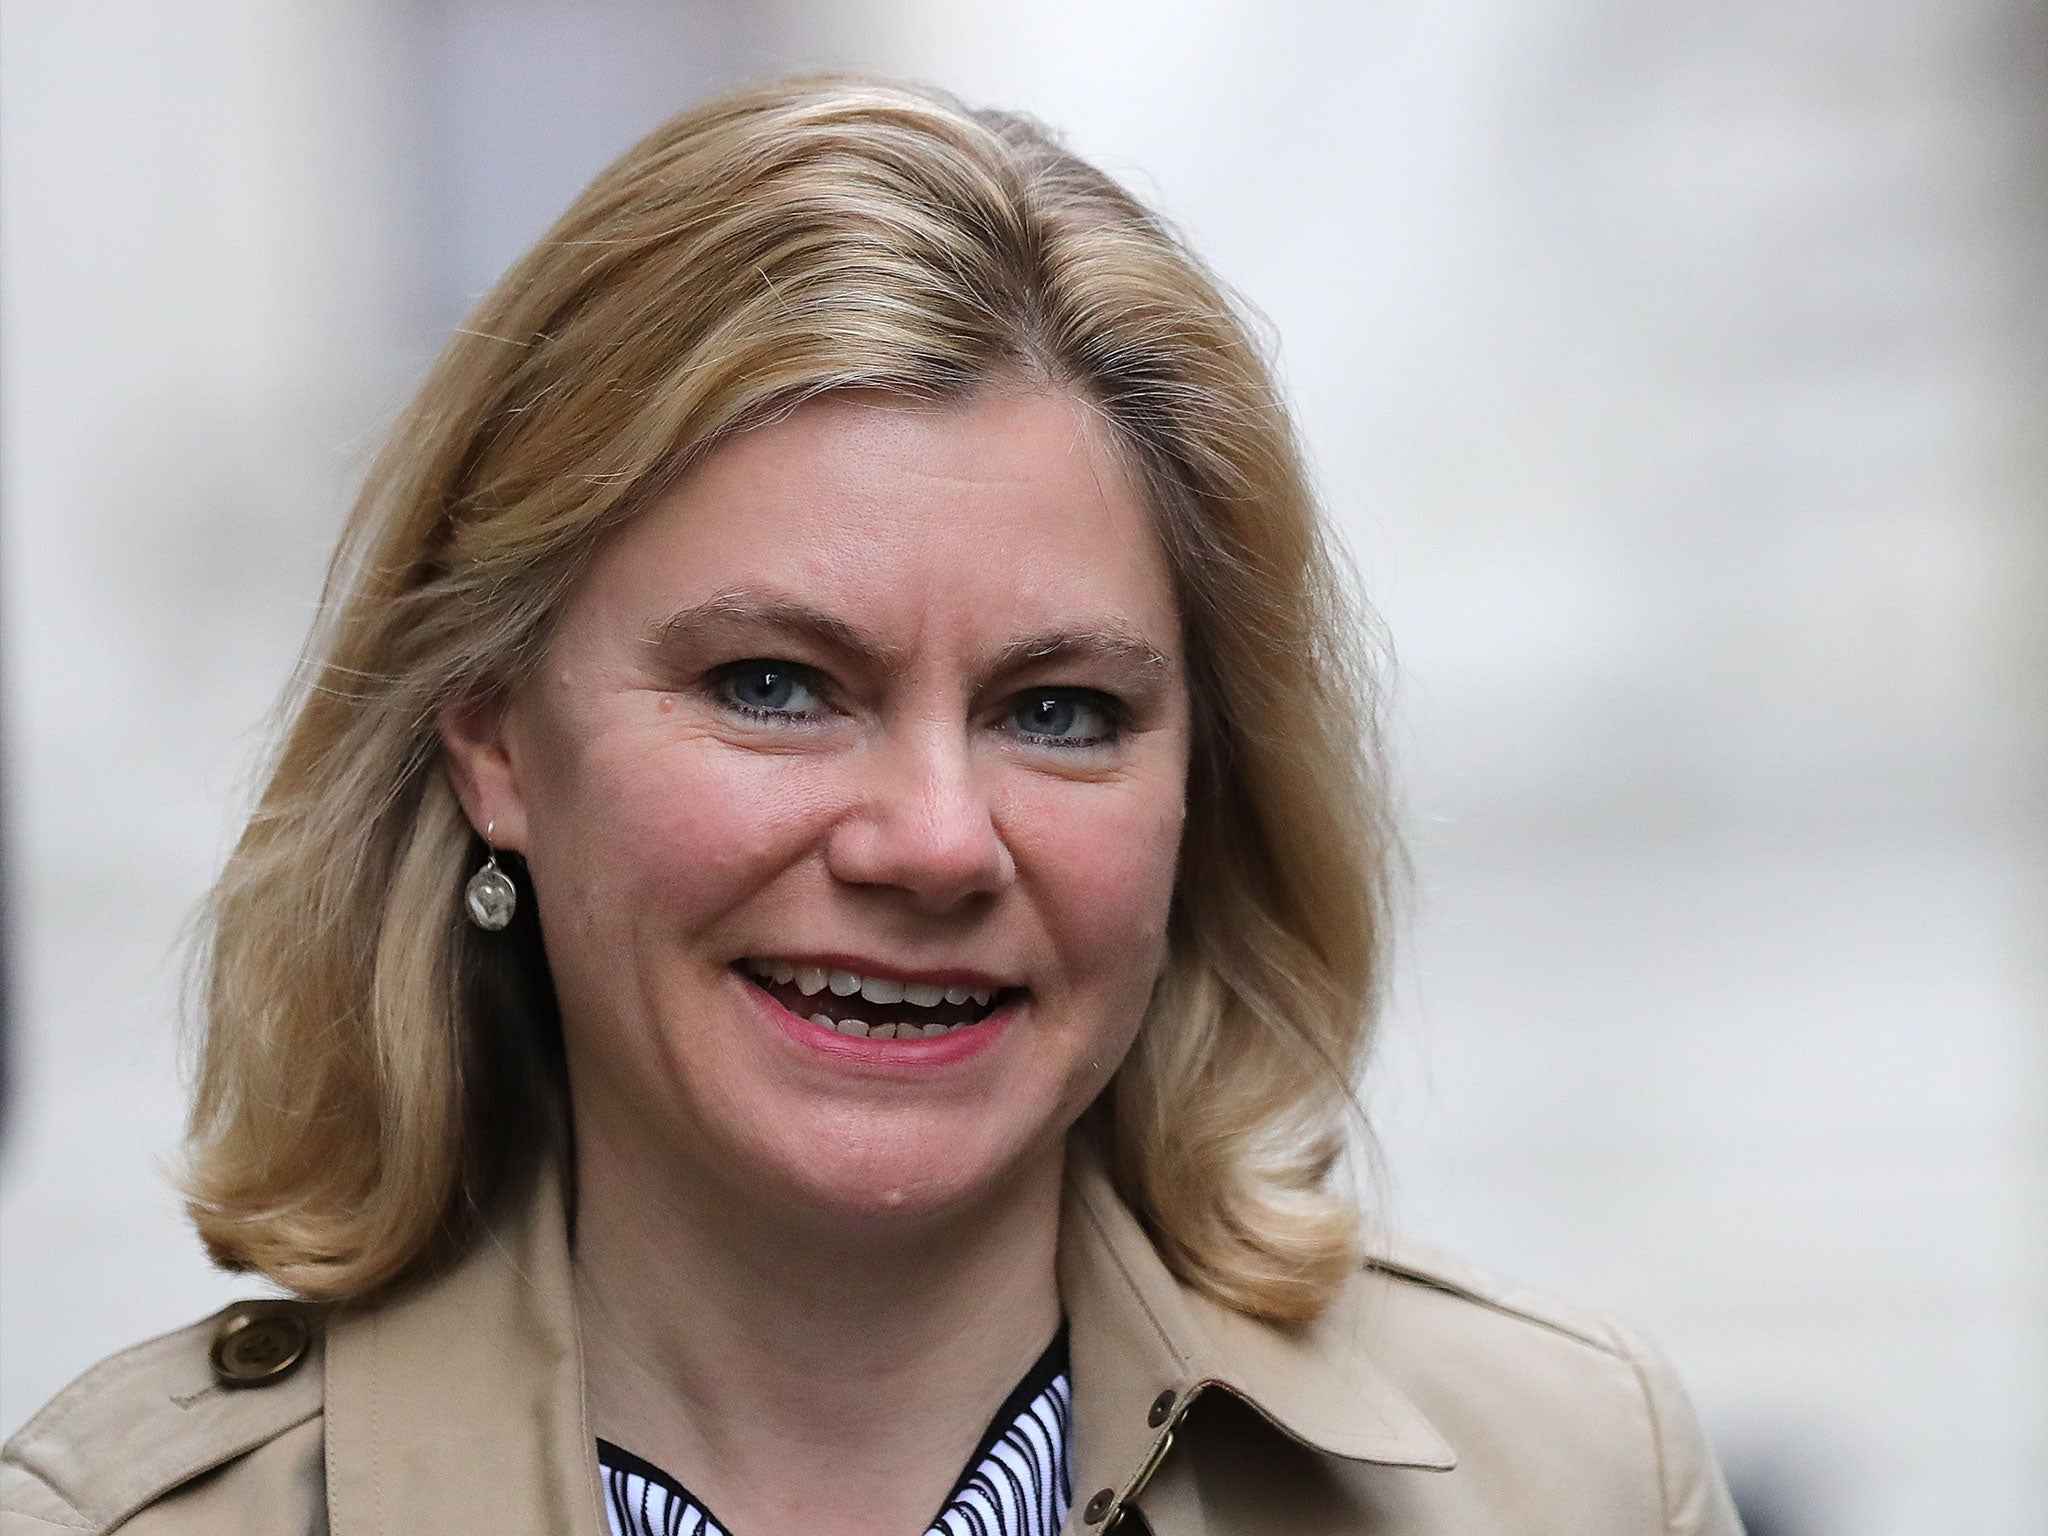 Education Secretary Justine Greening revealed she was in a same-sex relationship the day after the EU referendum